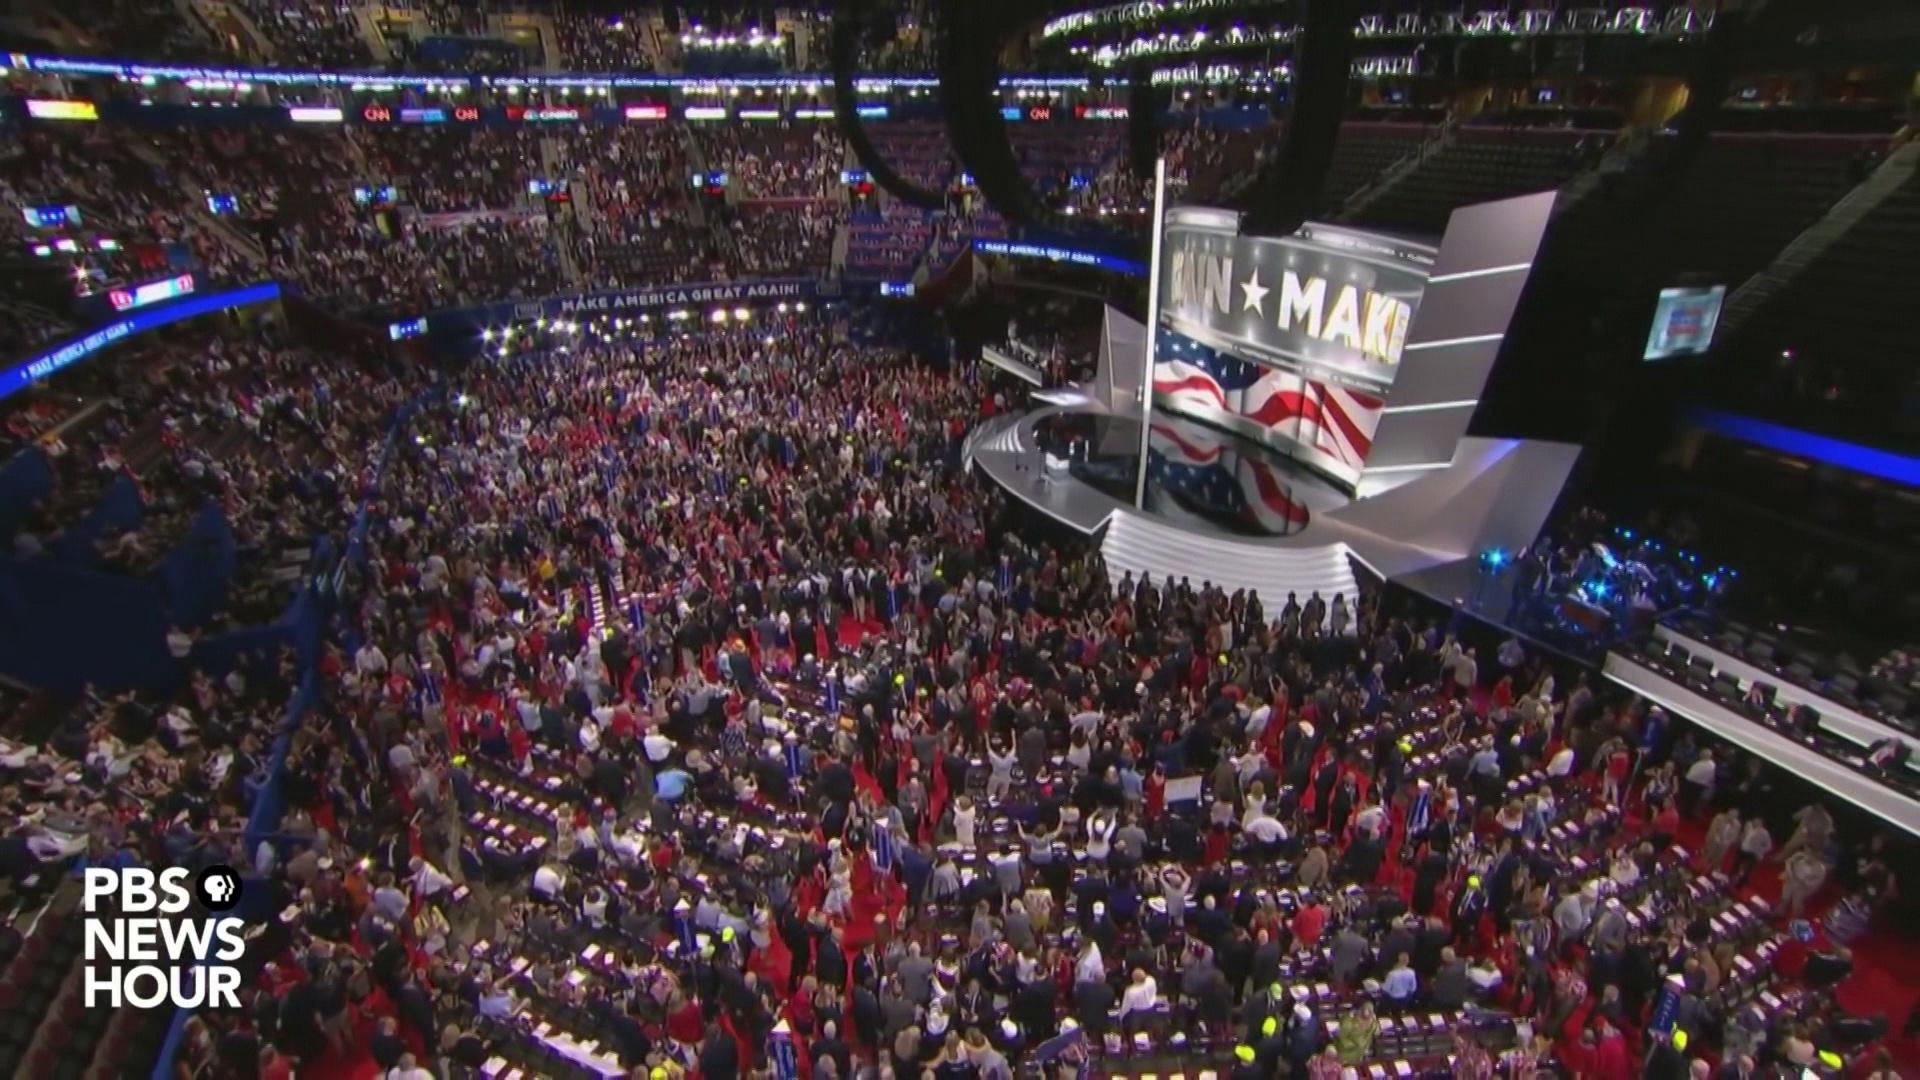 What’s the purpose of the RNC in Milwaukee, DNC in Chicago?